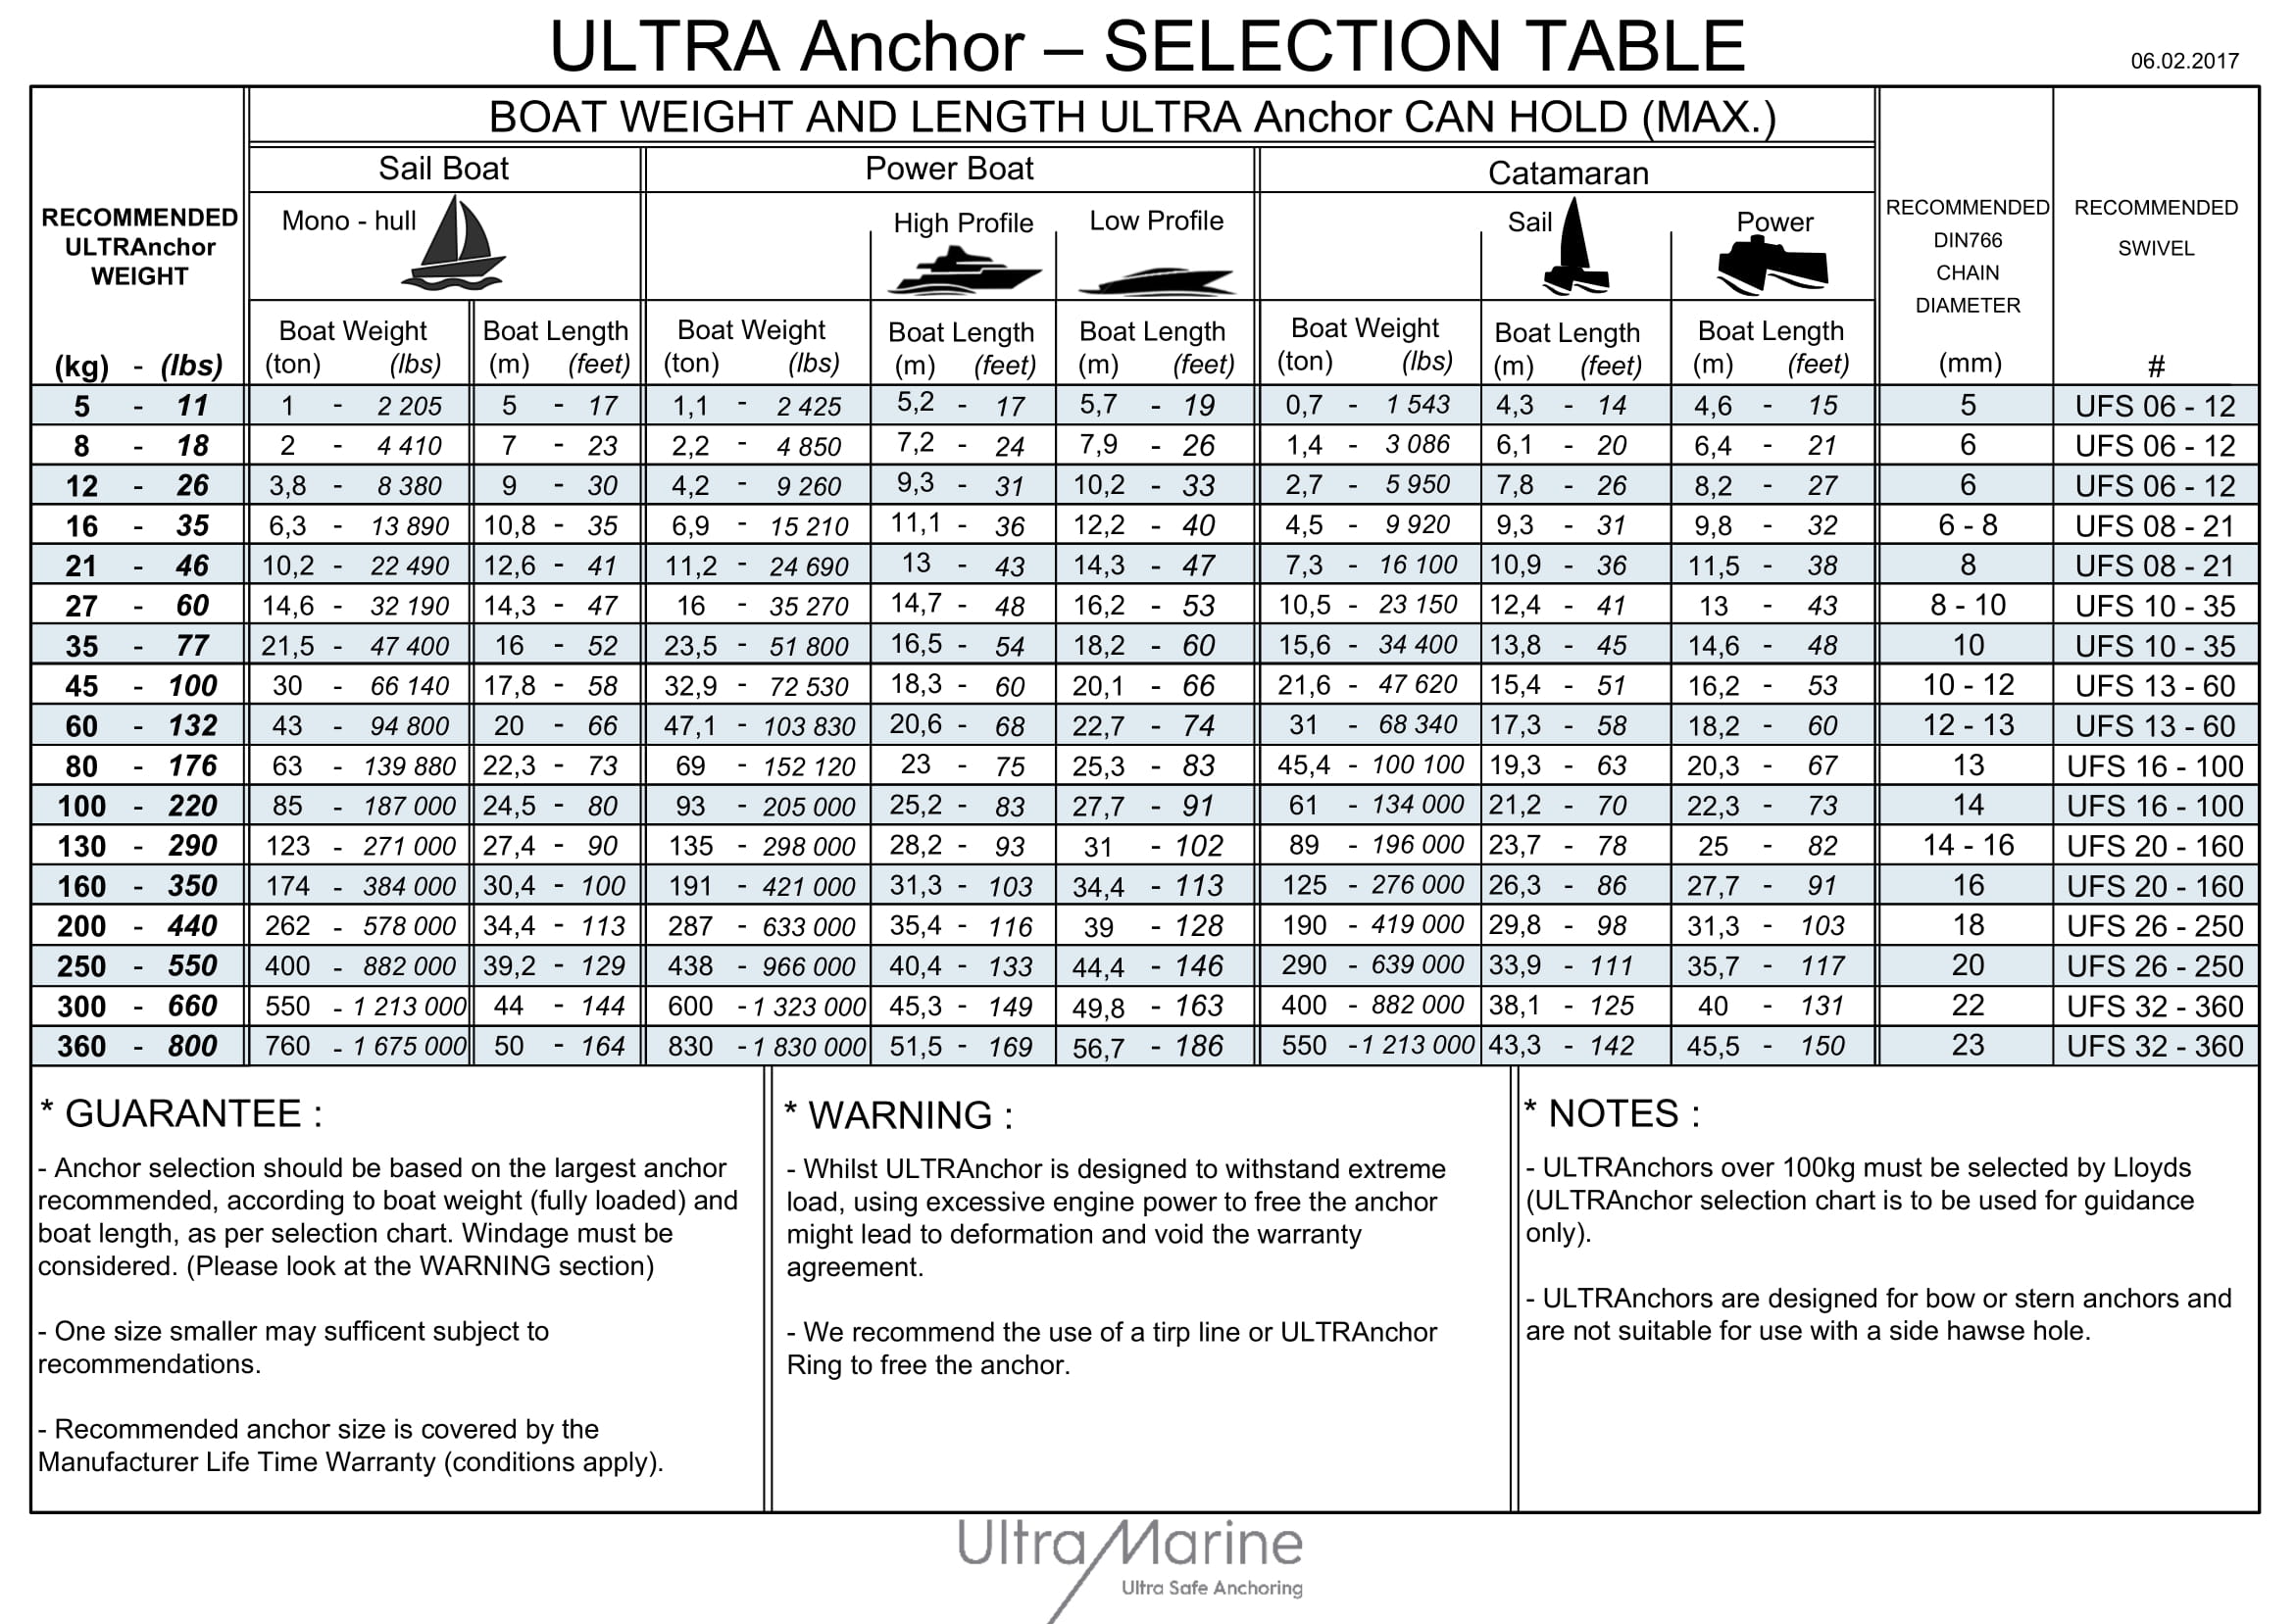 Ultra Anchor Size Chart - Selection Table